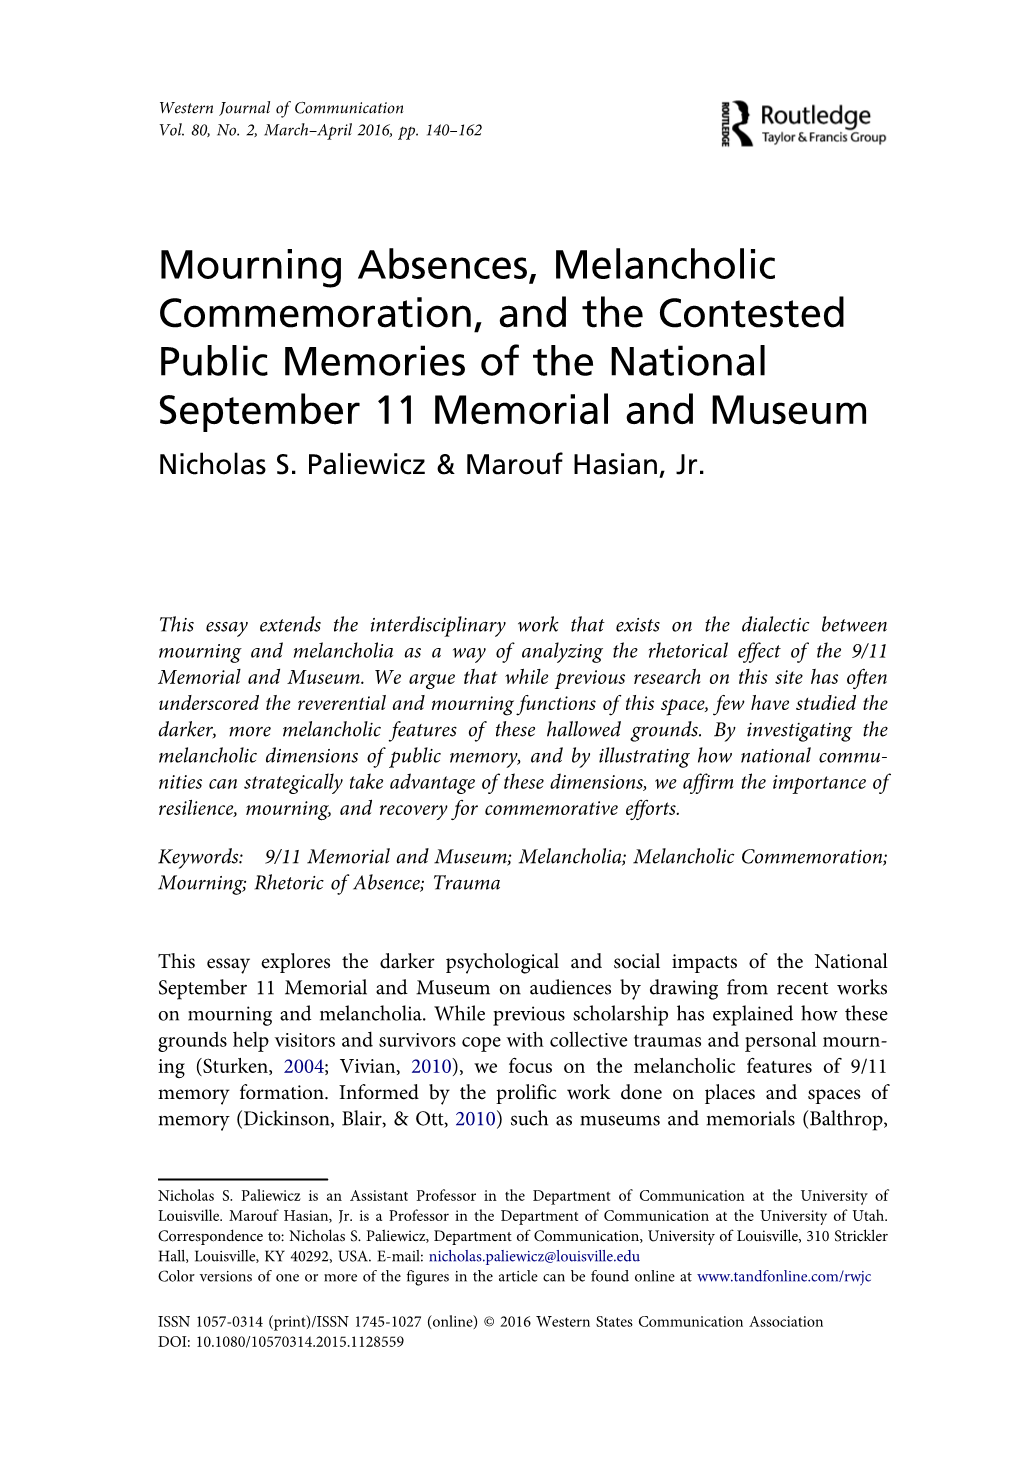 Mourning Absences, Melancholic Commemoration, and the Contested Public Memories of the National September 11 Memorial and Museum Nicholas S